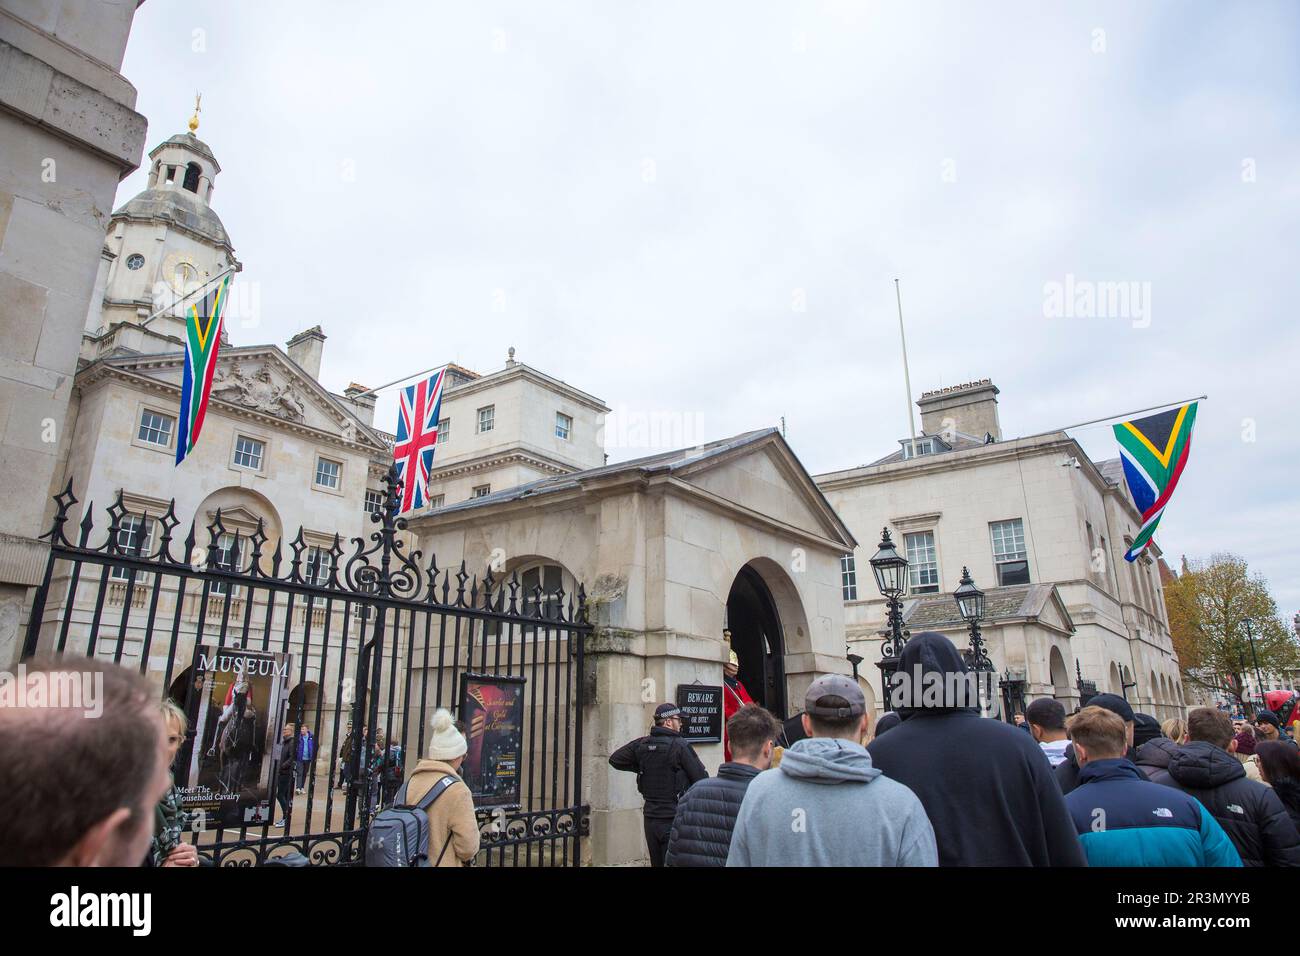 Union flags and flags of South Africa are seen in central London ahead of a state visit of the President of South Africa. Stock Photo